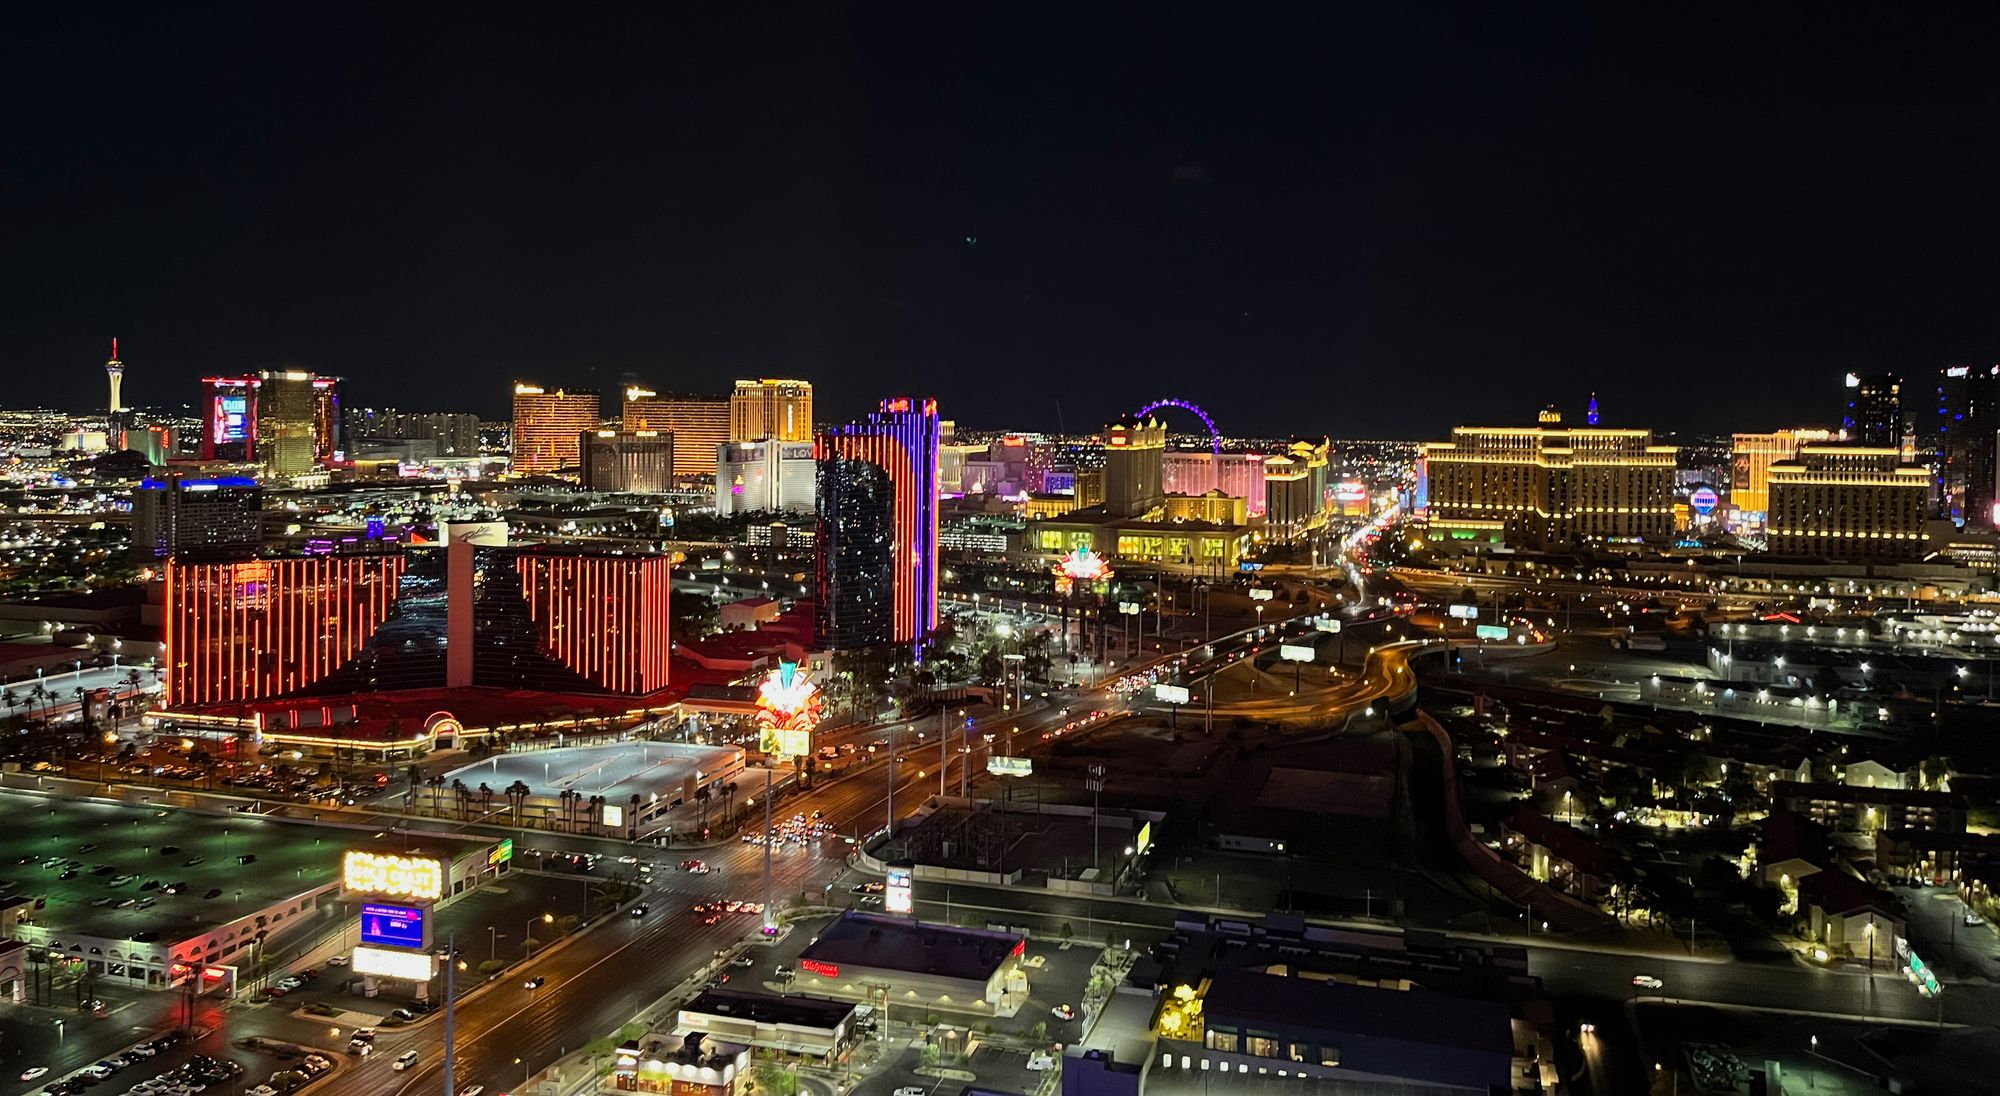 A night-time picture of the Las Vegas skyline taken from a high floor. In the foreground a large road, mostly empty, and two blocks of low buildings and empty space with a couple billboards with bright lights. Mid-frame, a string of high-rise casinos covered in sparkly lights. In the background, pitch black sky.